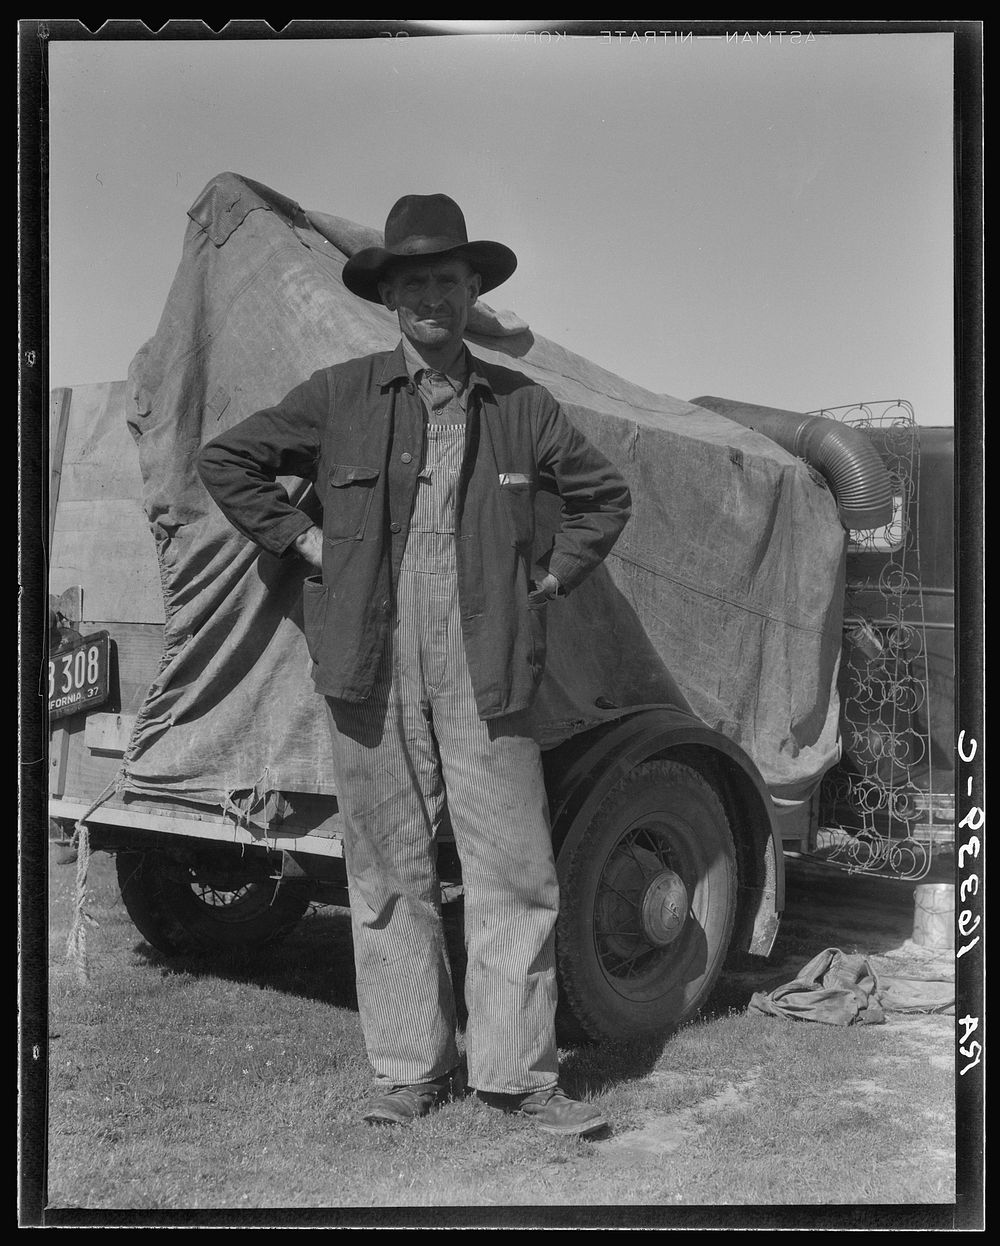 Texas ex-farmer, now a migratory agricultural worker in Nipomo, California. Sourced from the Library of Congress.